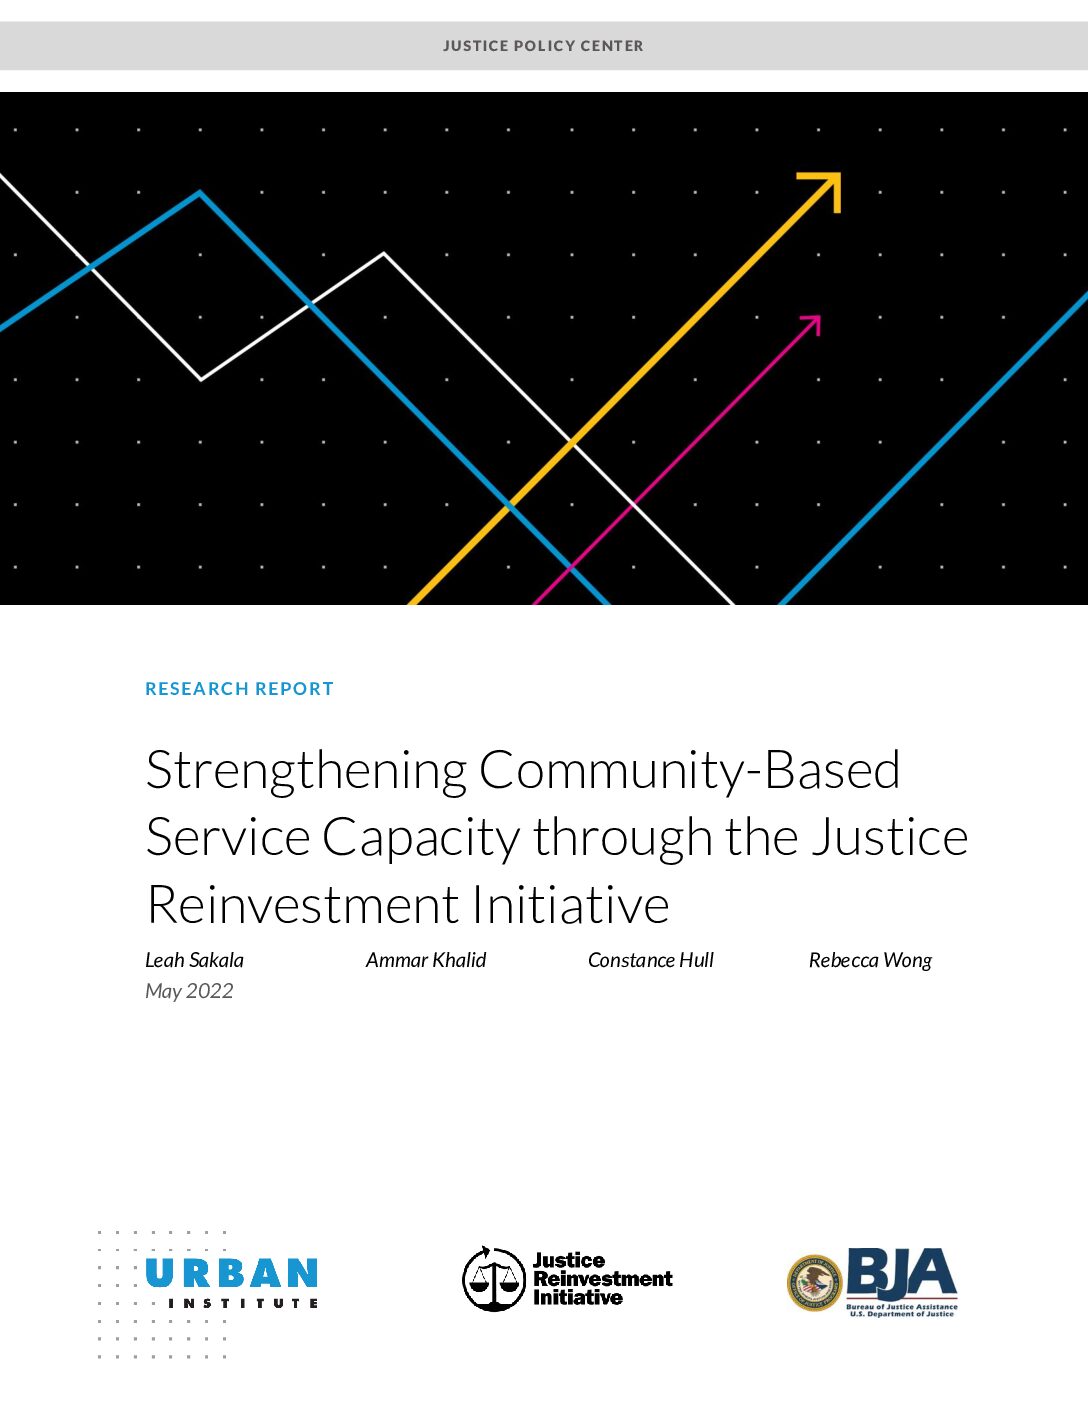 Strengthening Community-Based Service Capacity through the Justice Reinvestment Initiative